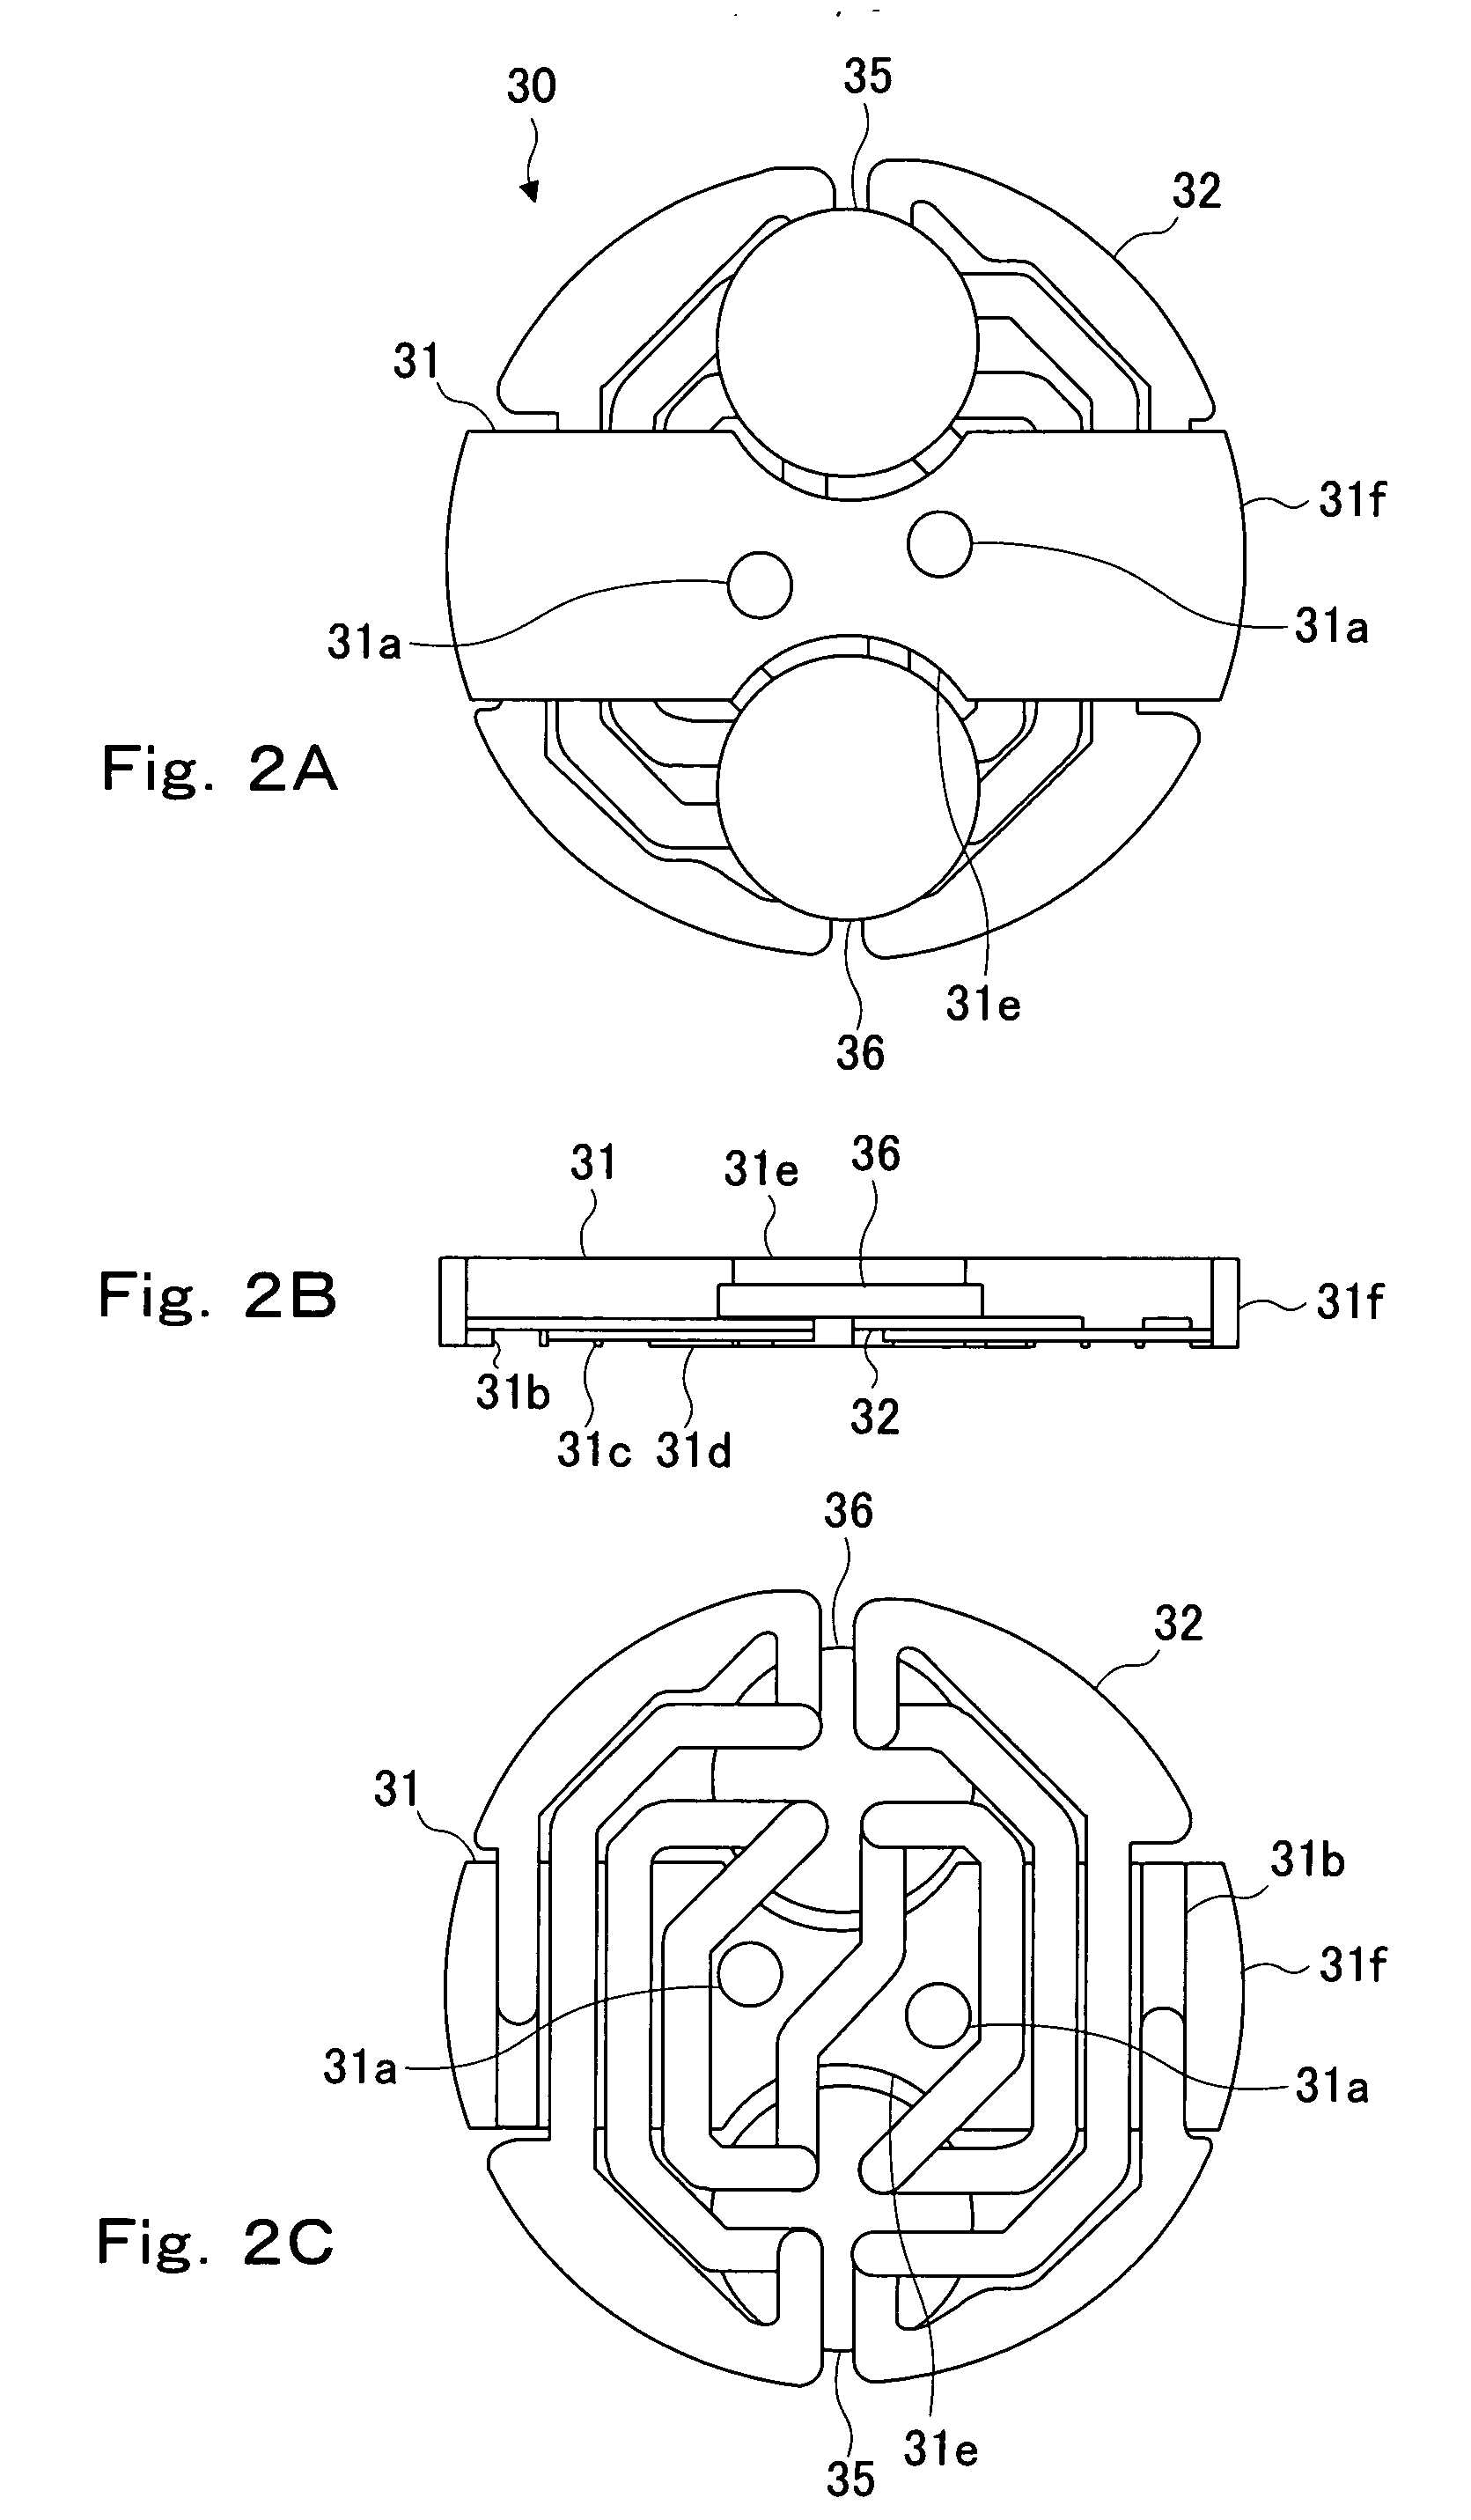 Sensor unit of thermal analysis equipment and method of manufacturing the same